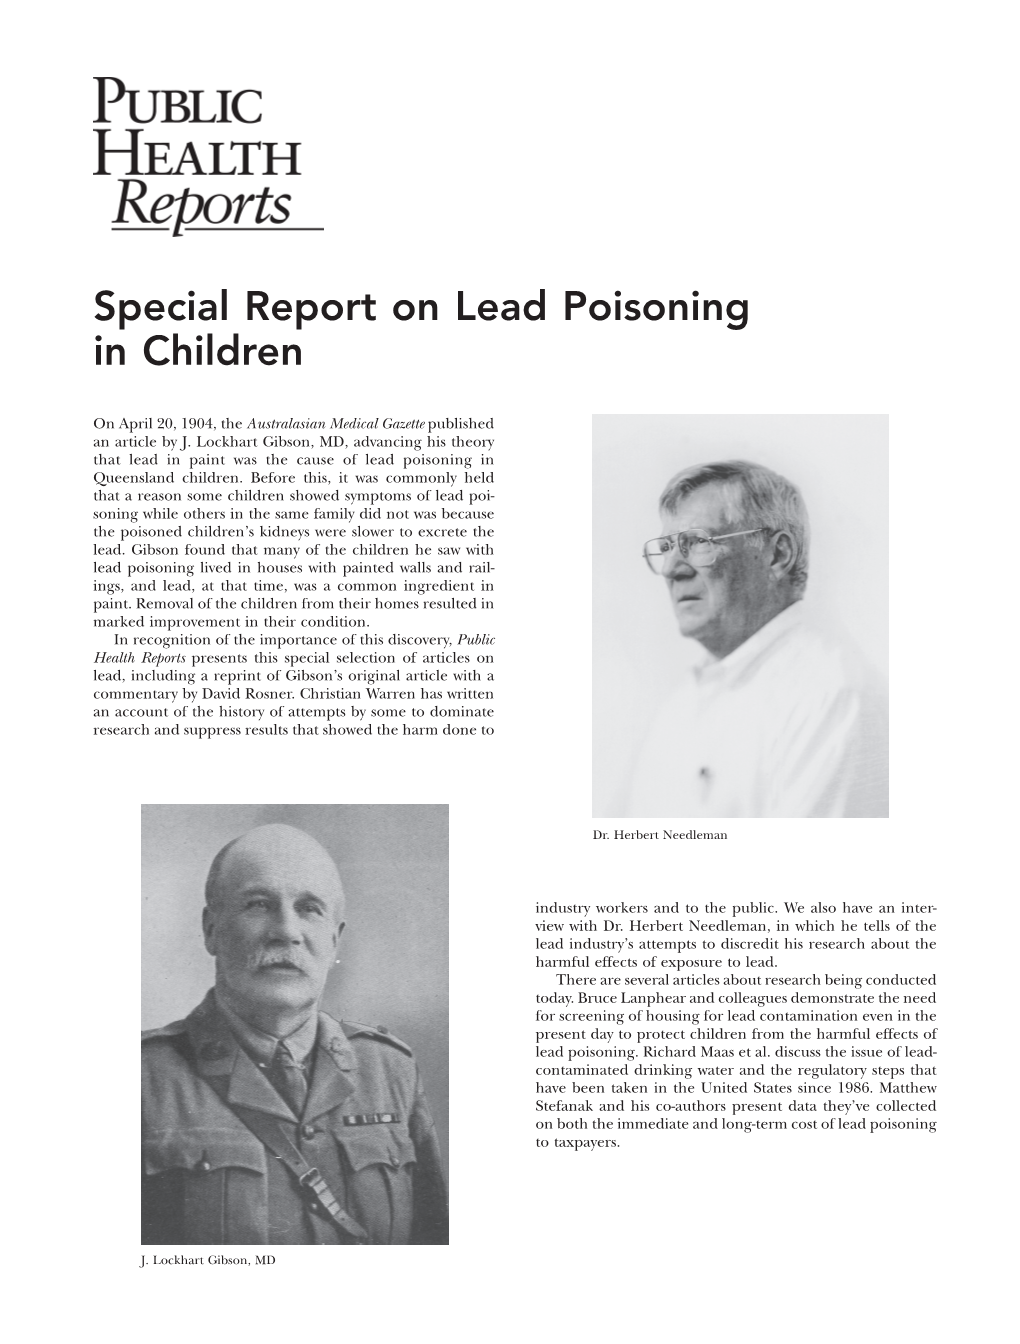 Special Report on Lead Poisoning in Children